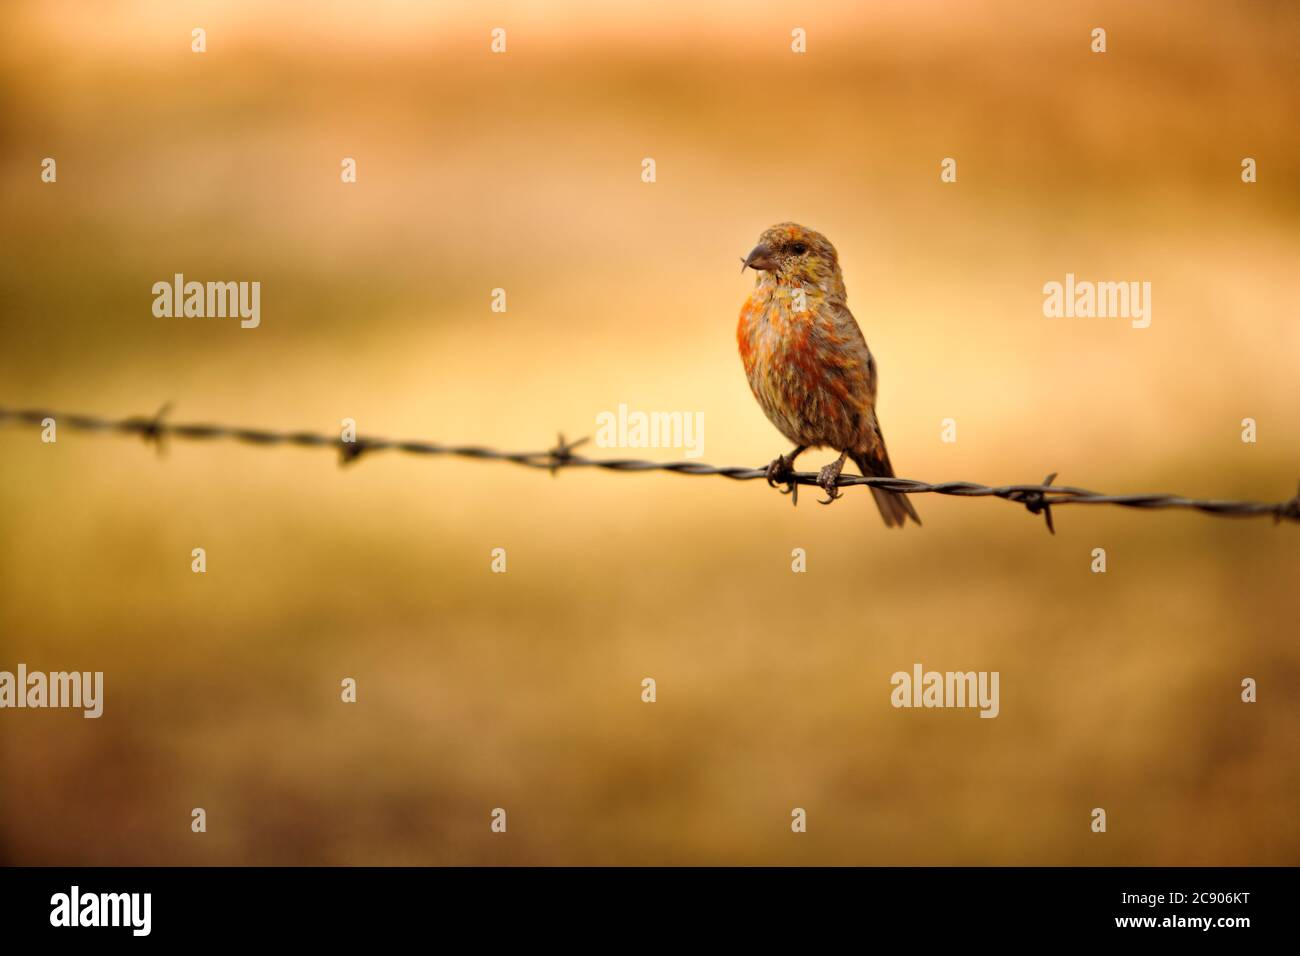 A female red crossbill, Loxia curvirostra, perched on a barbed wire fence. Red crossbills are a Medium-large finch with large head, plump body, short Stock Photo